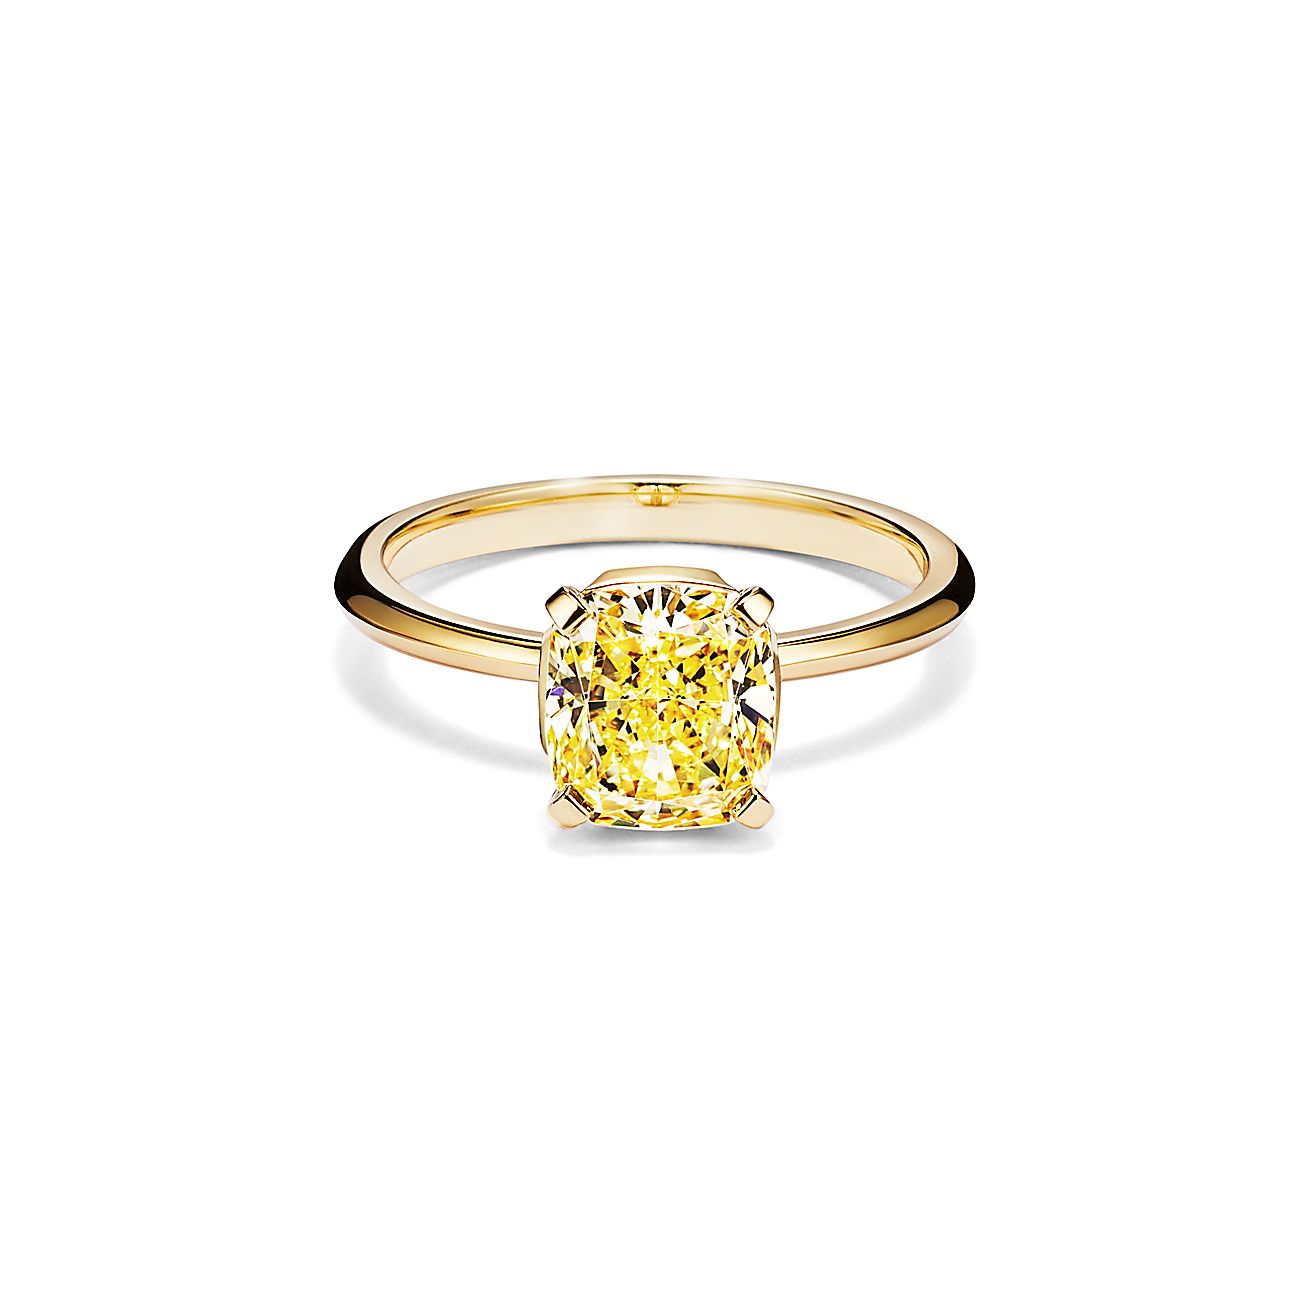 Tiffany True Engagement Ring With A Cushion Cut Yellow Diamond In 18k Yellow Gold 63513547 996014 ED M ?&op Usm=1.75,1.0,6.0&$cropN=0.1,0.1,0.8,0.8&defaultImage=NoImageAvailableInternal&